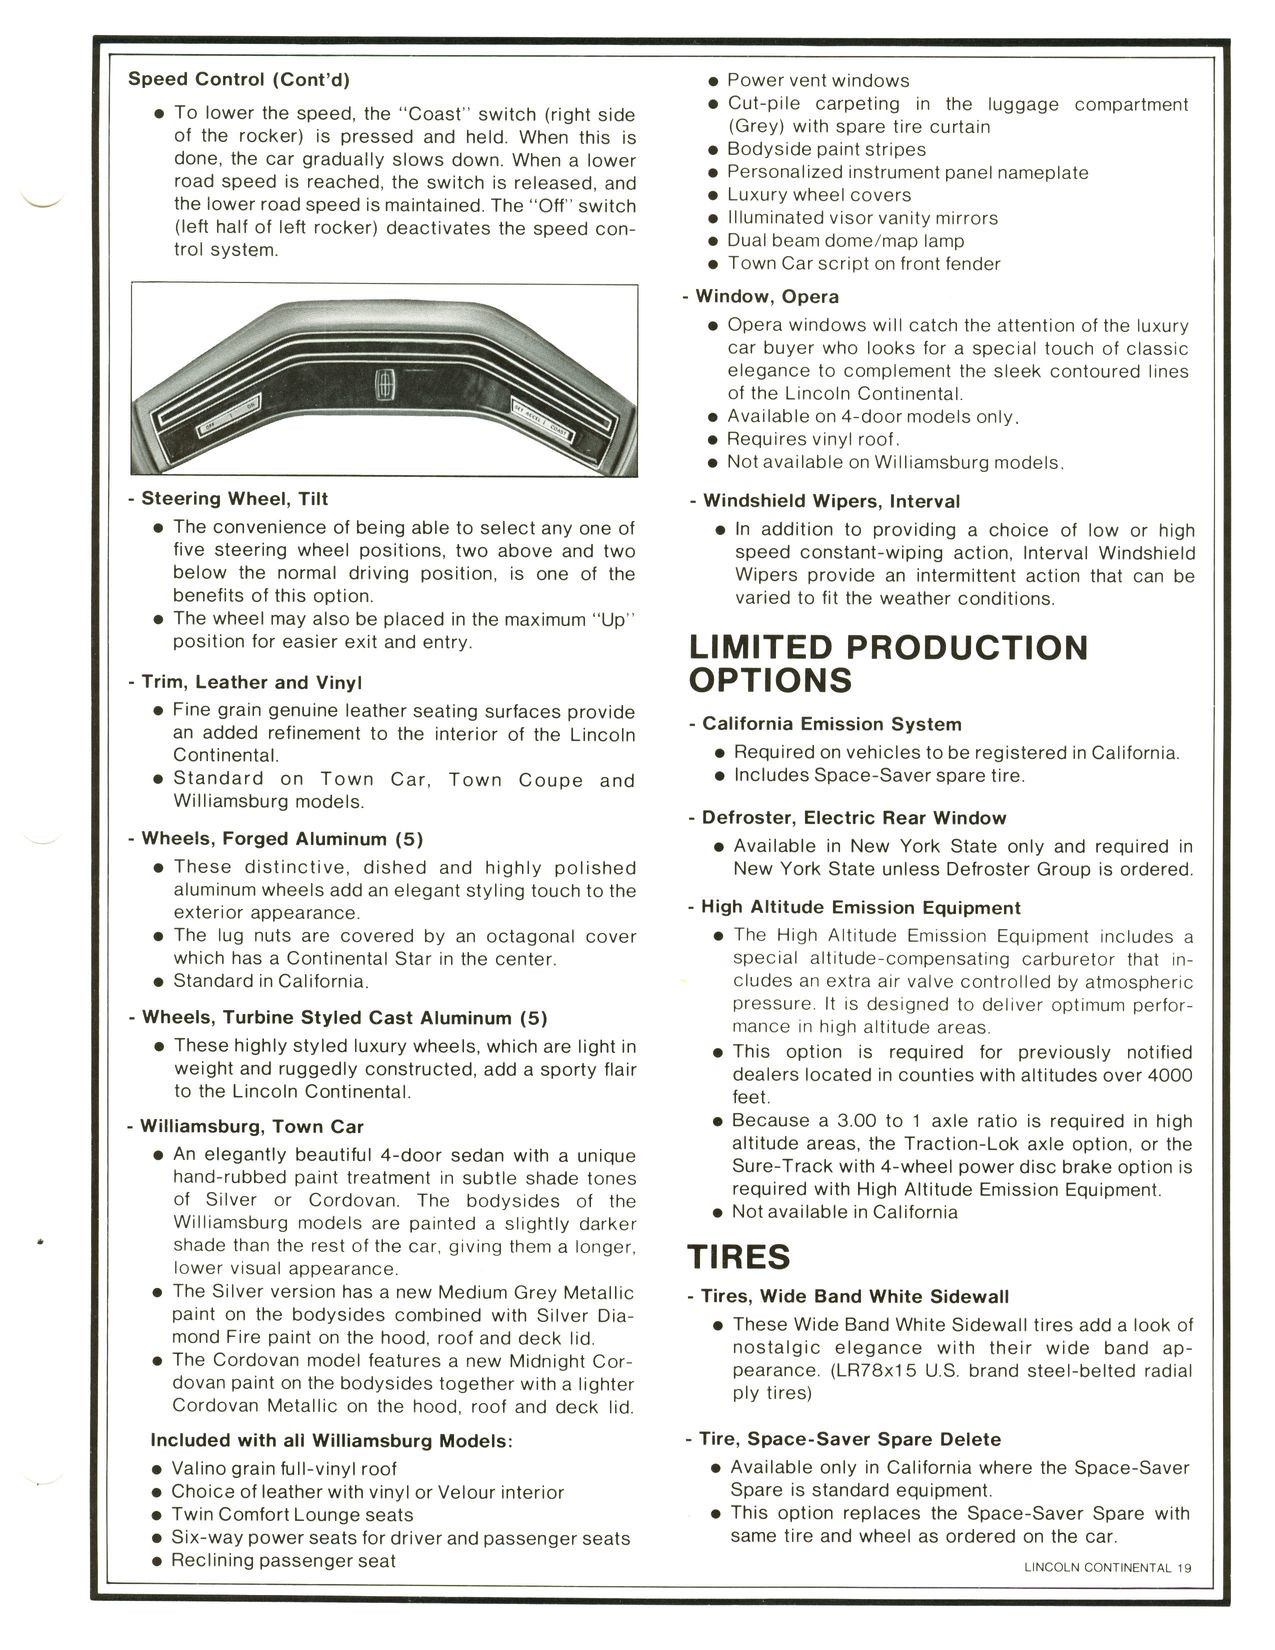 1977_Continental_Product_Facts_Book-2-19